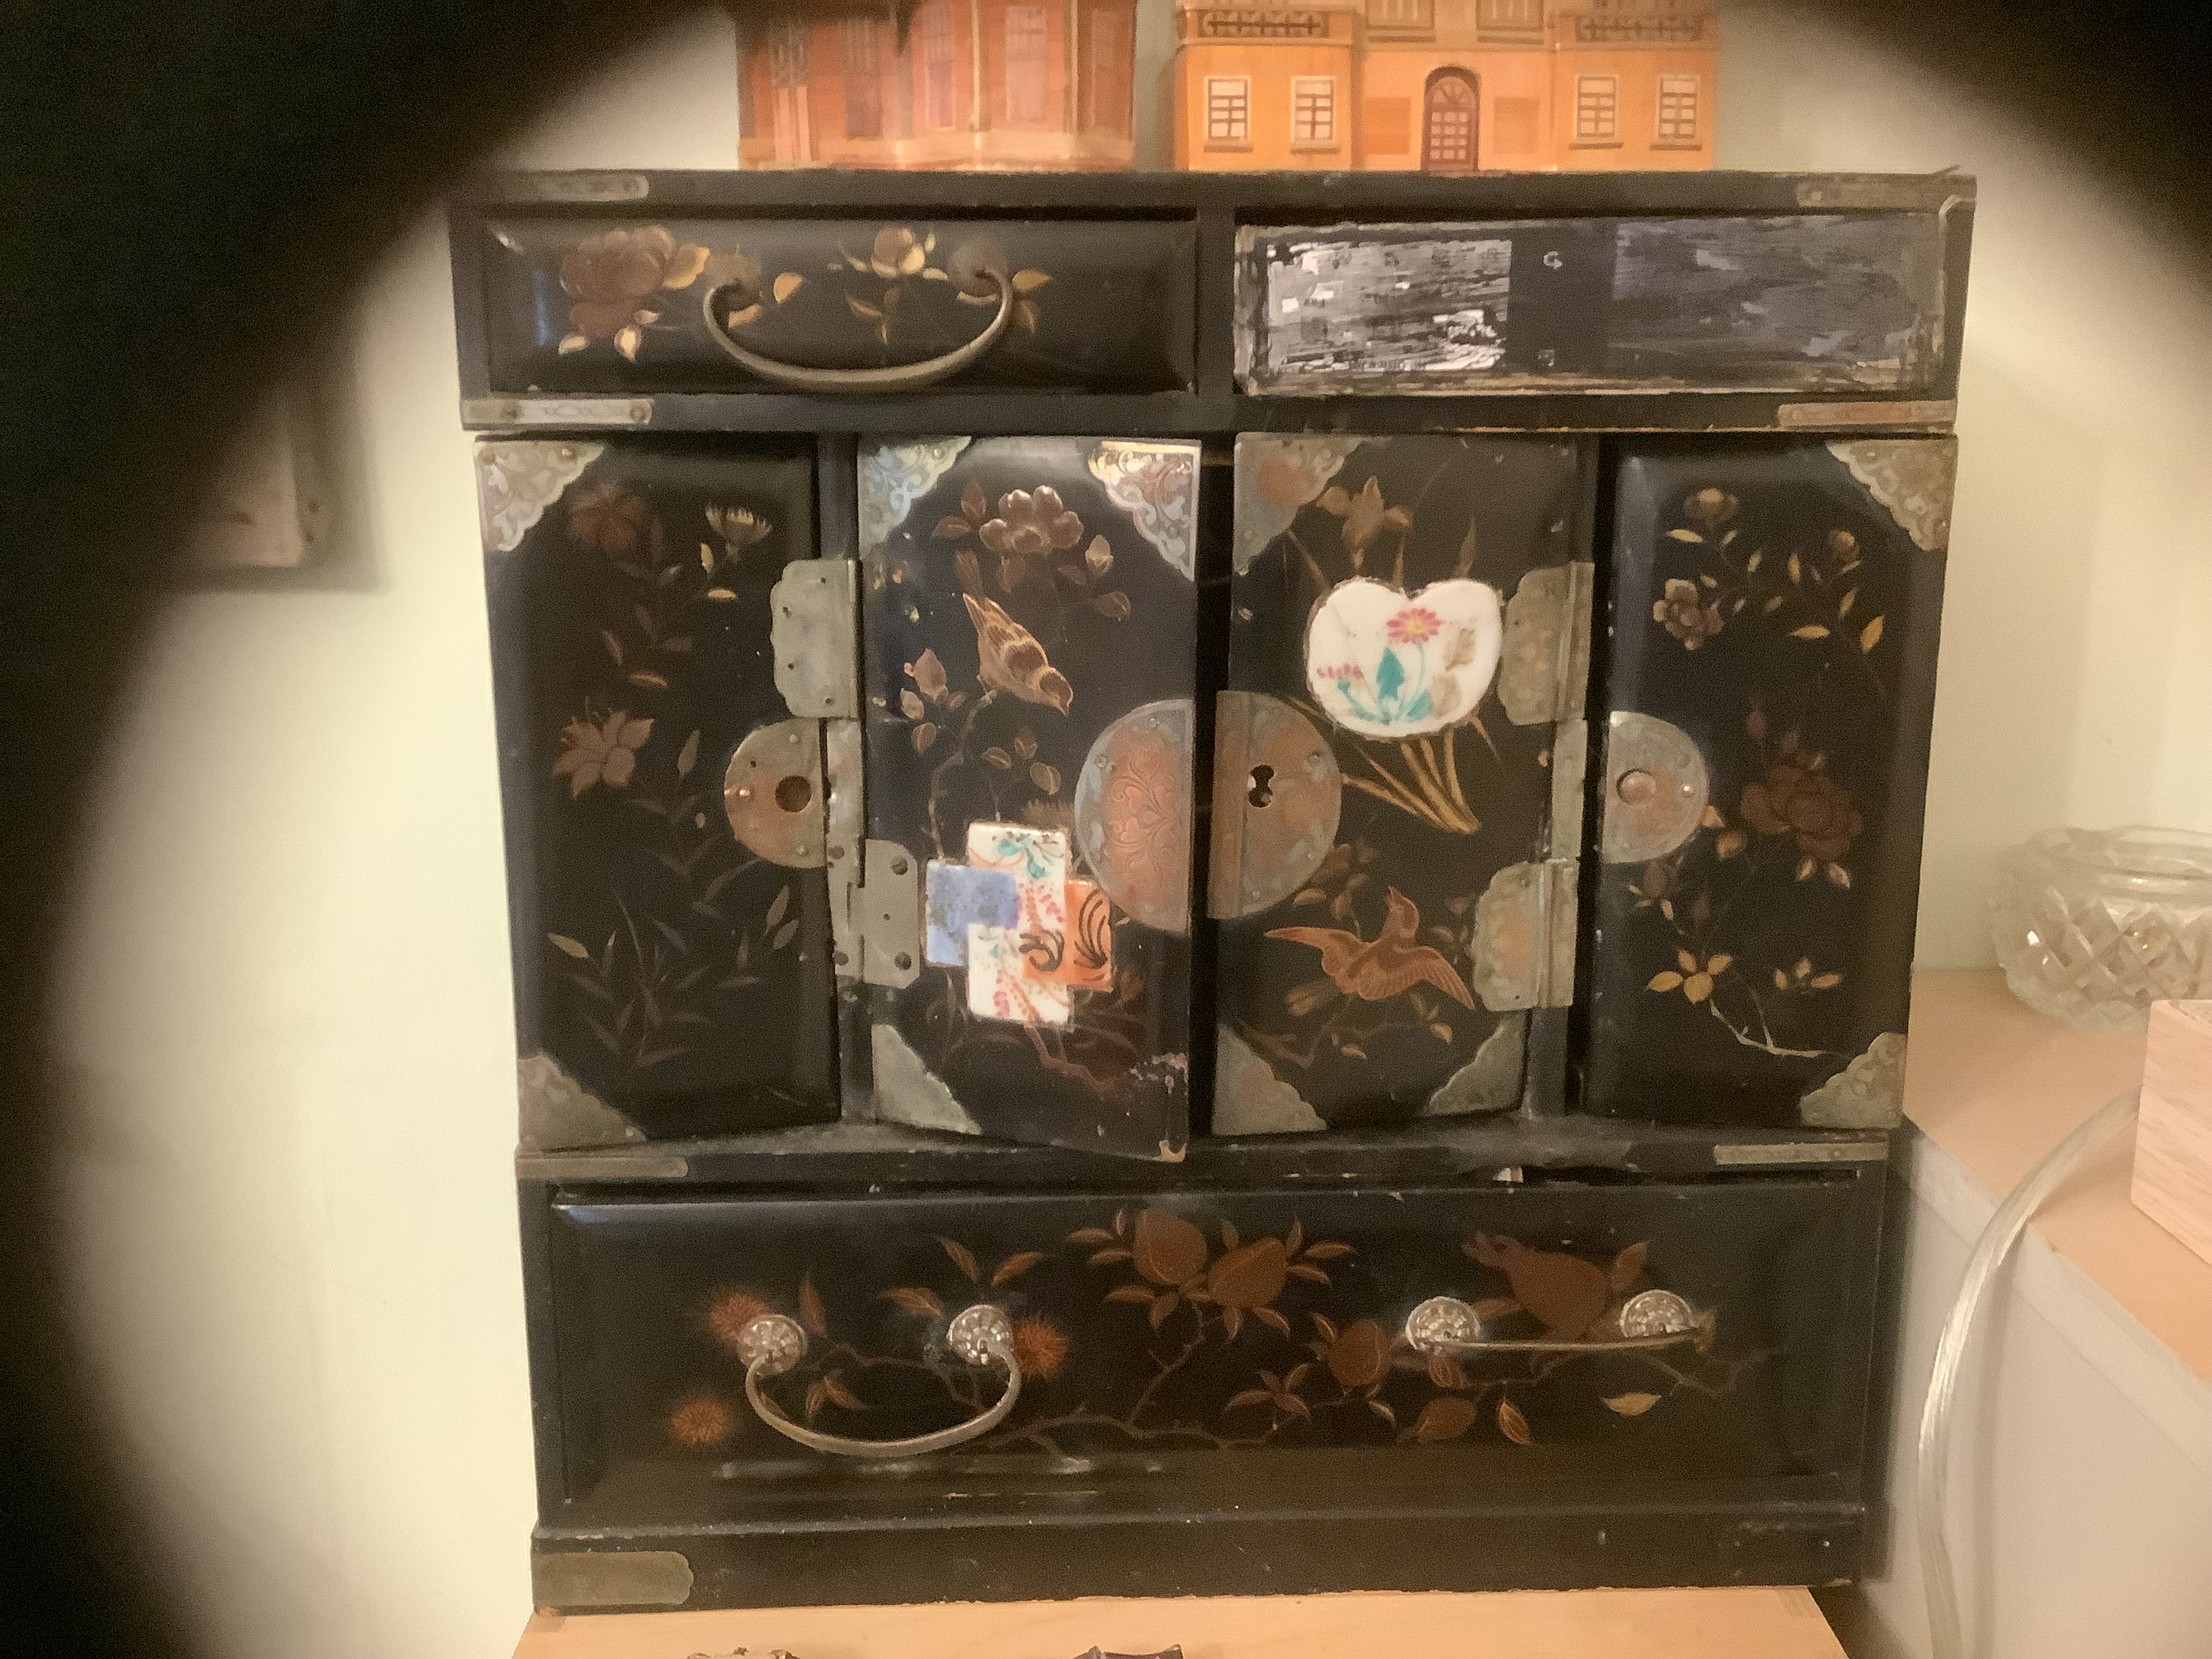 3 old Chinese jewellery cabinets to keep pearls in